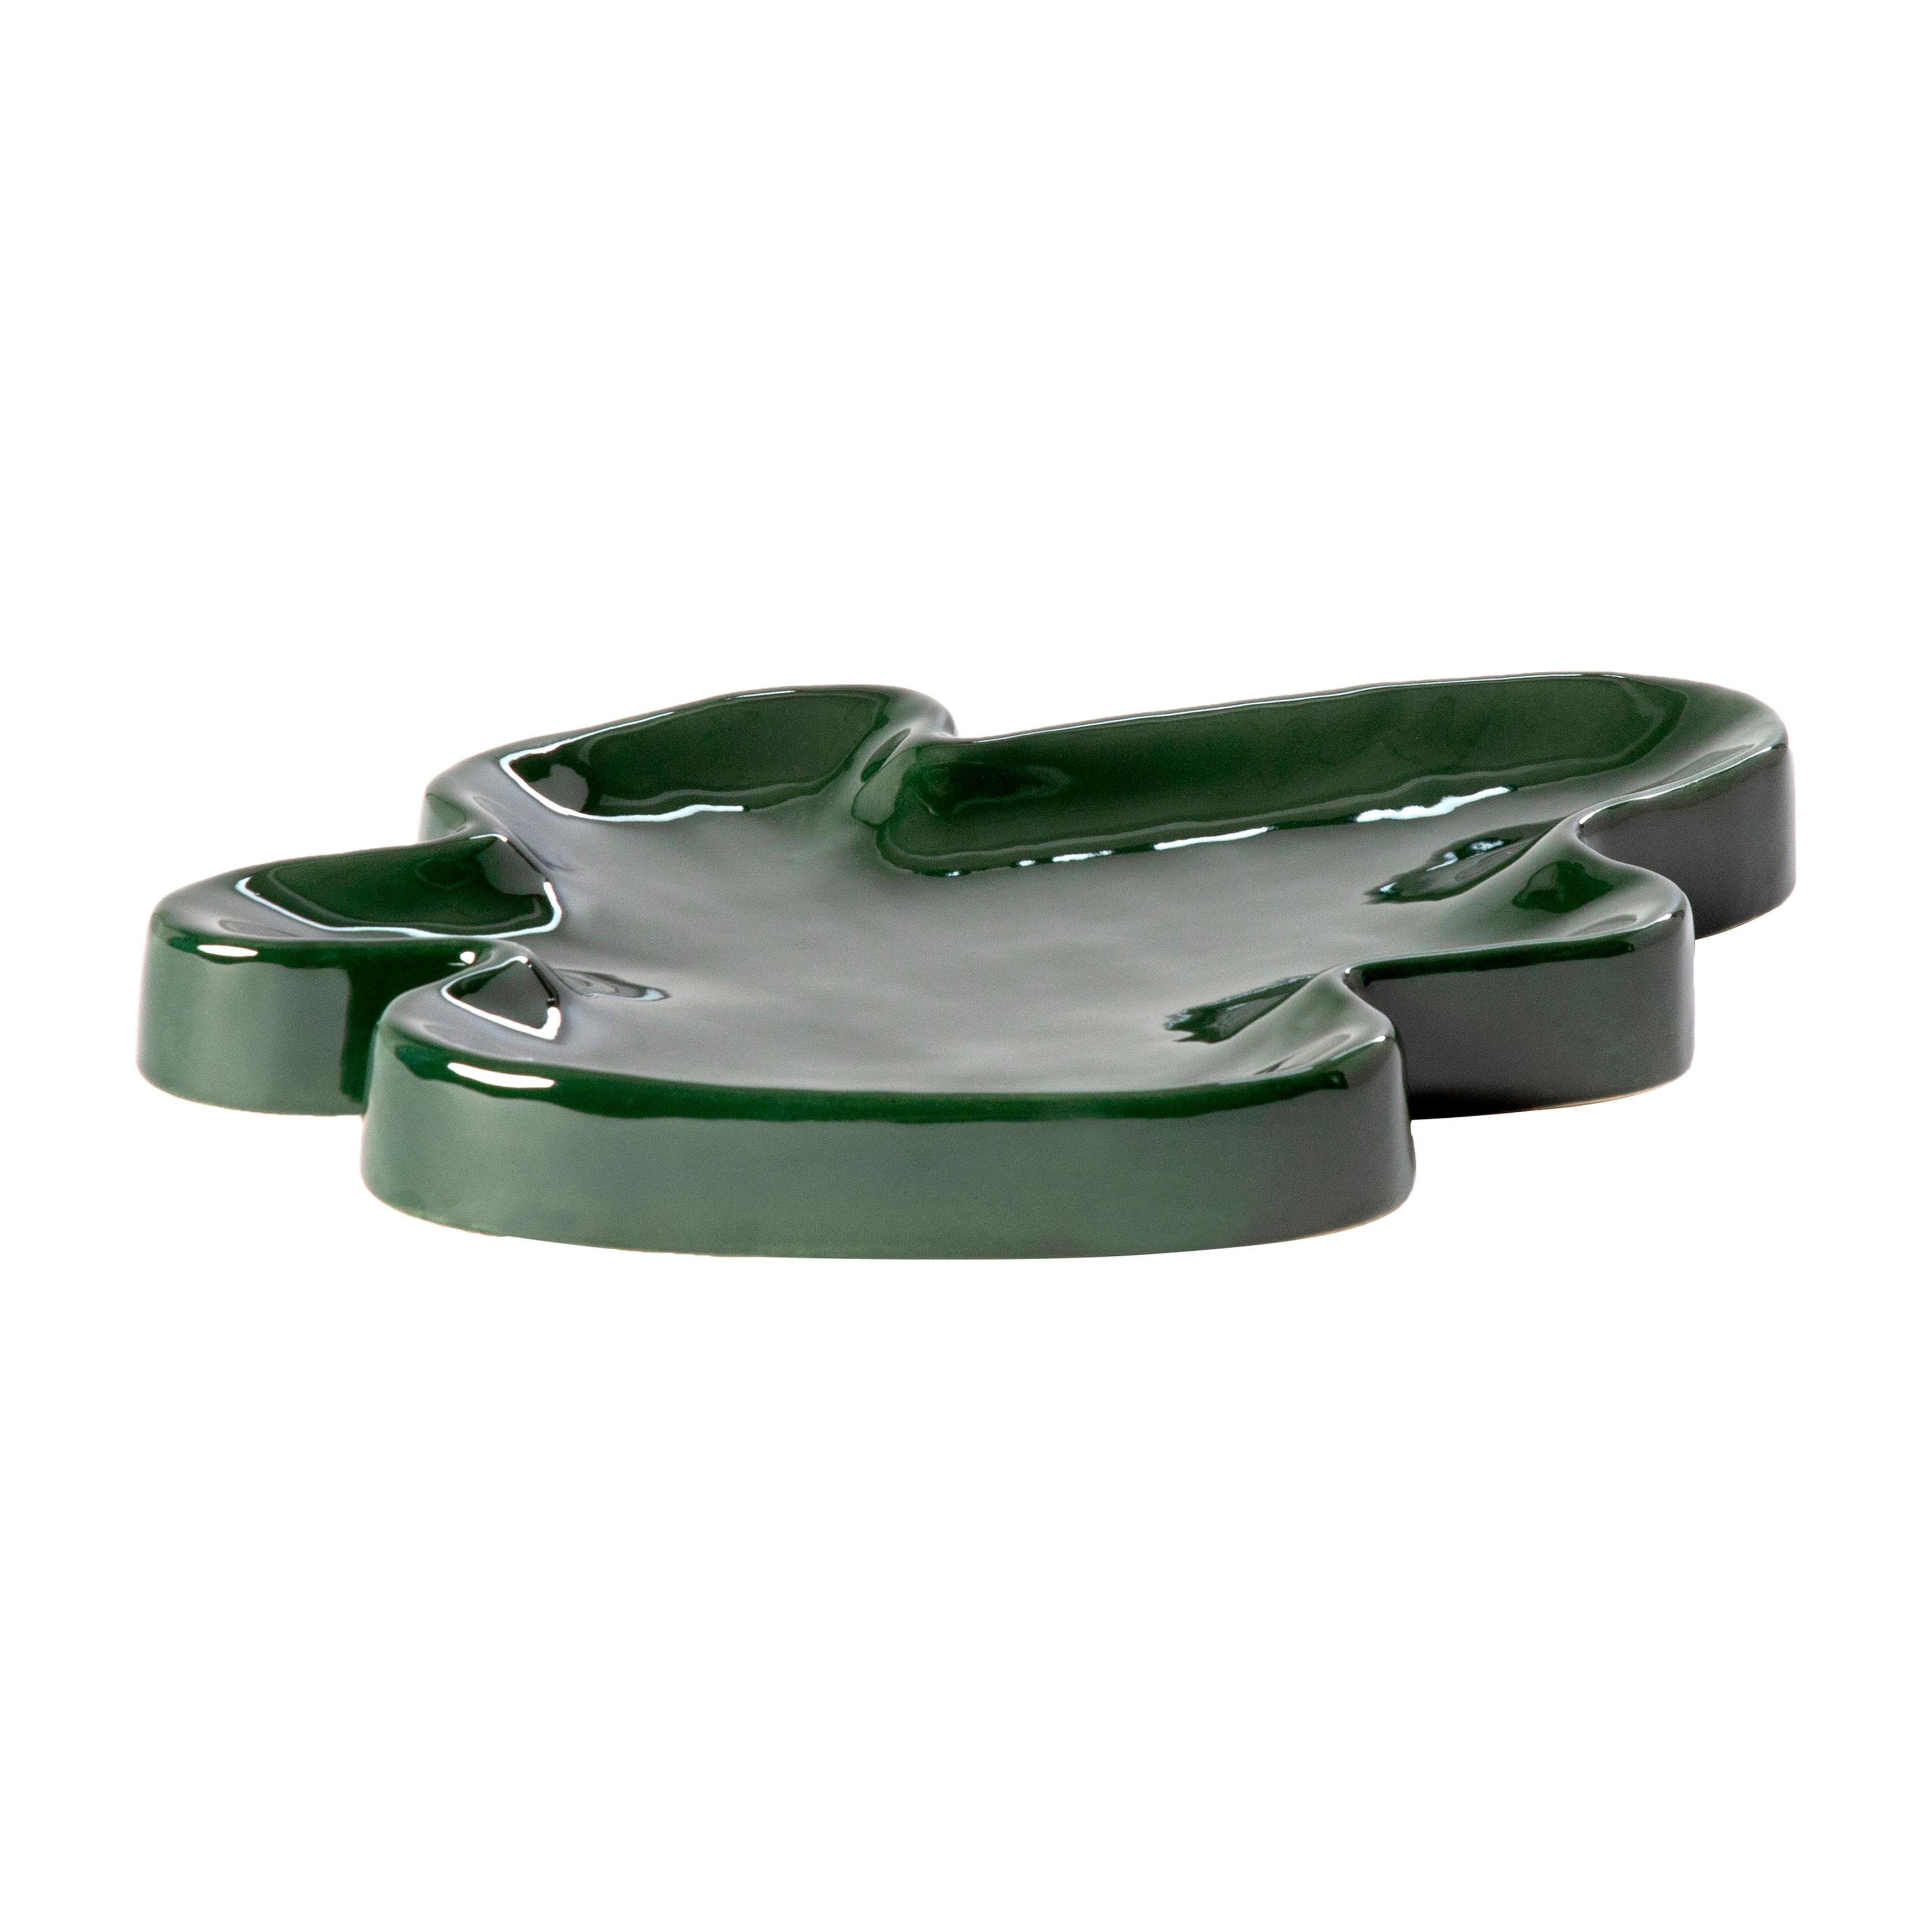 Lake big emerald tray by Pulpo
Dimensions: D41 x W24 x H4 cm
Materials: ceramic

Also available in different colours.

These charming additions allow you to create a true tablescape environment; from the tones and textures of the urban